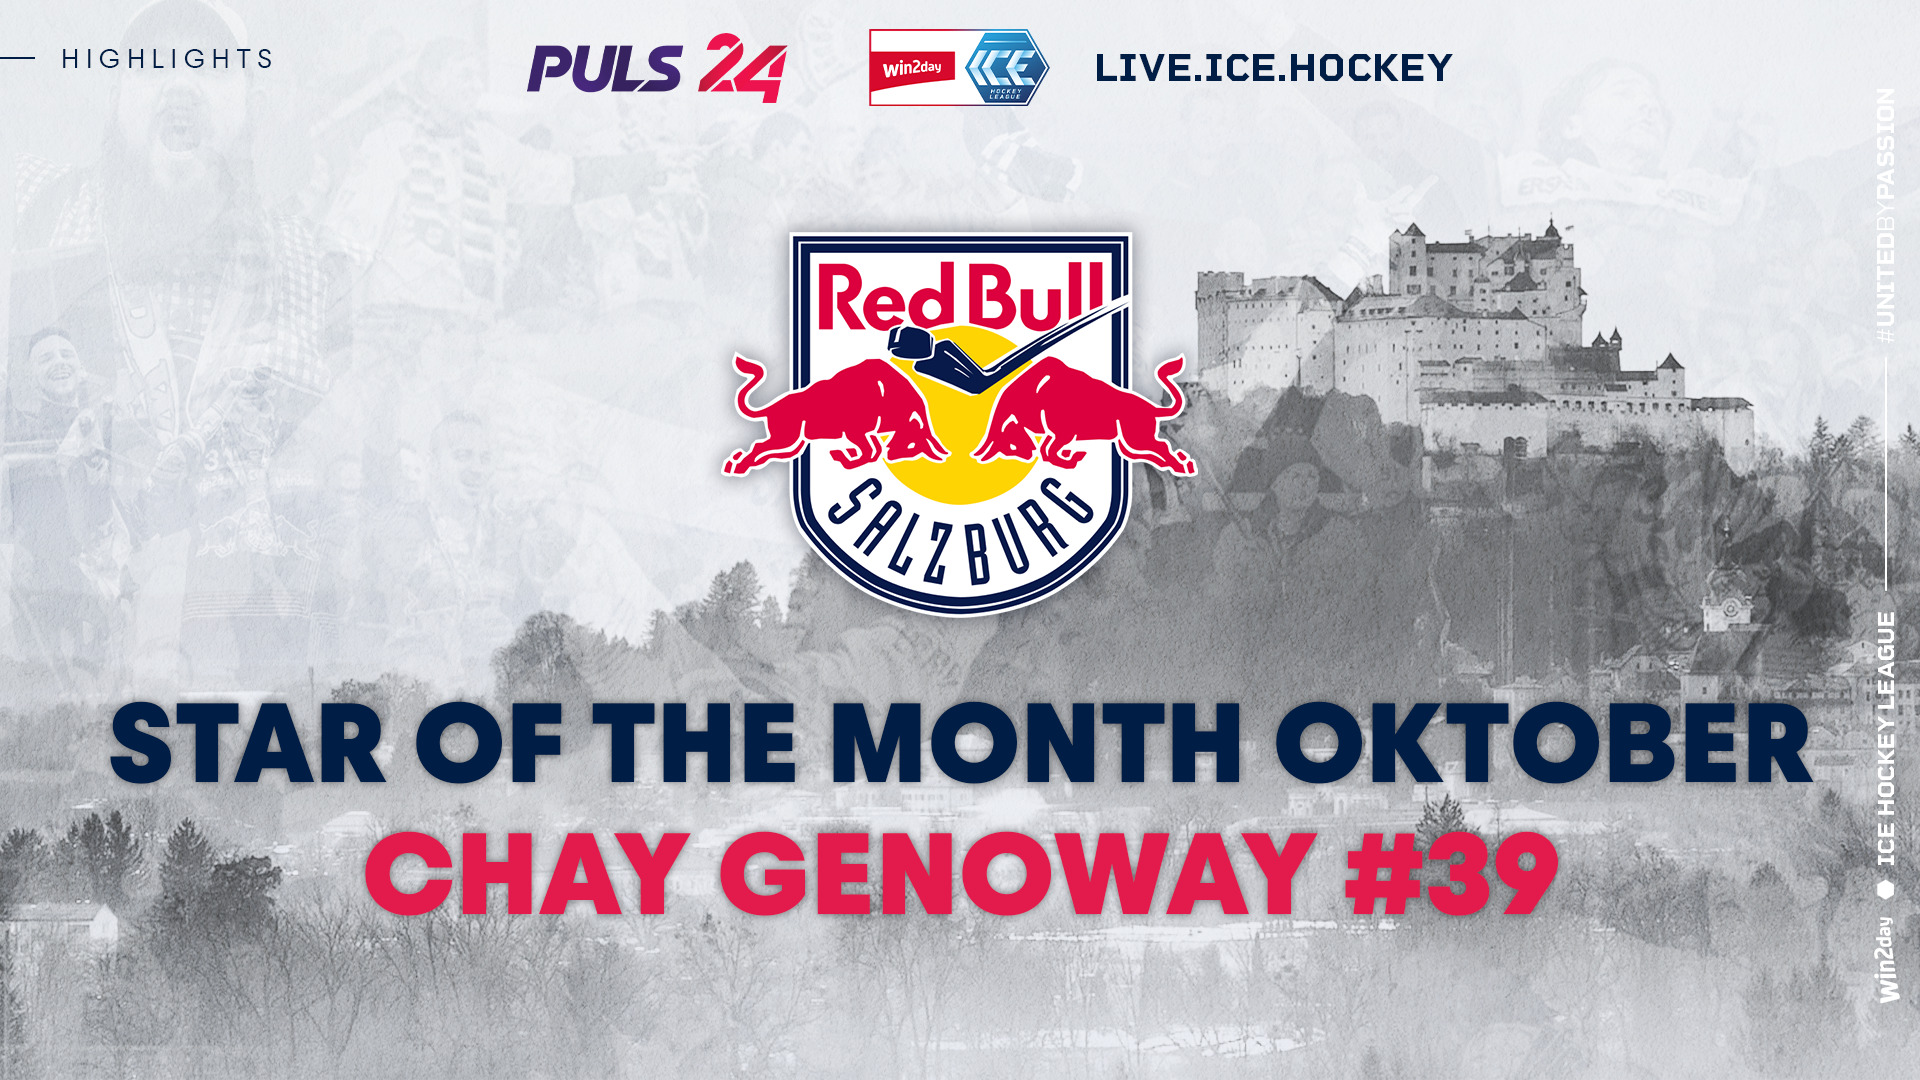 Star of the Month Oktober - Chay Genoway #39